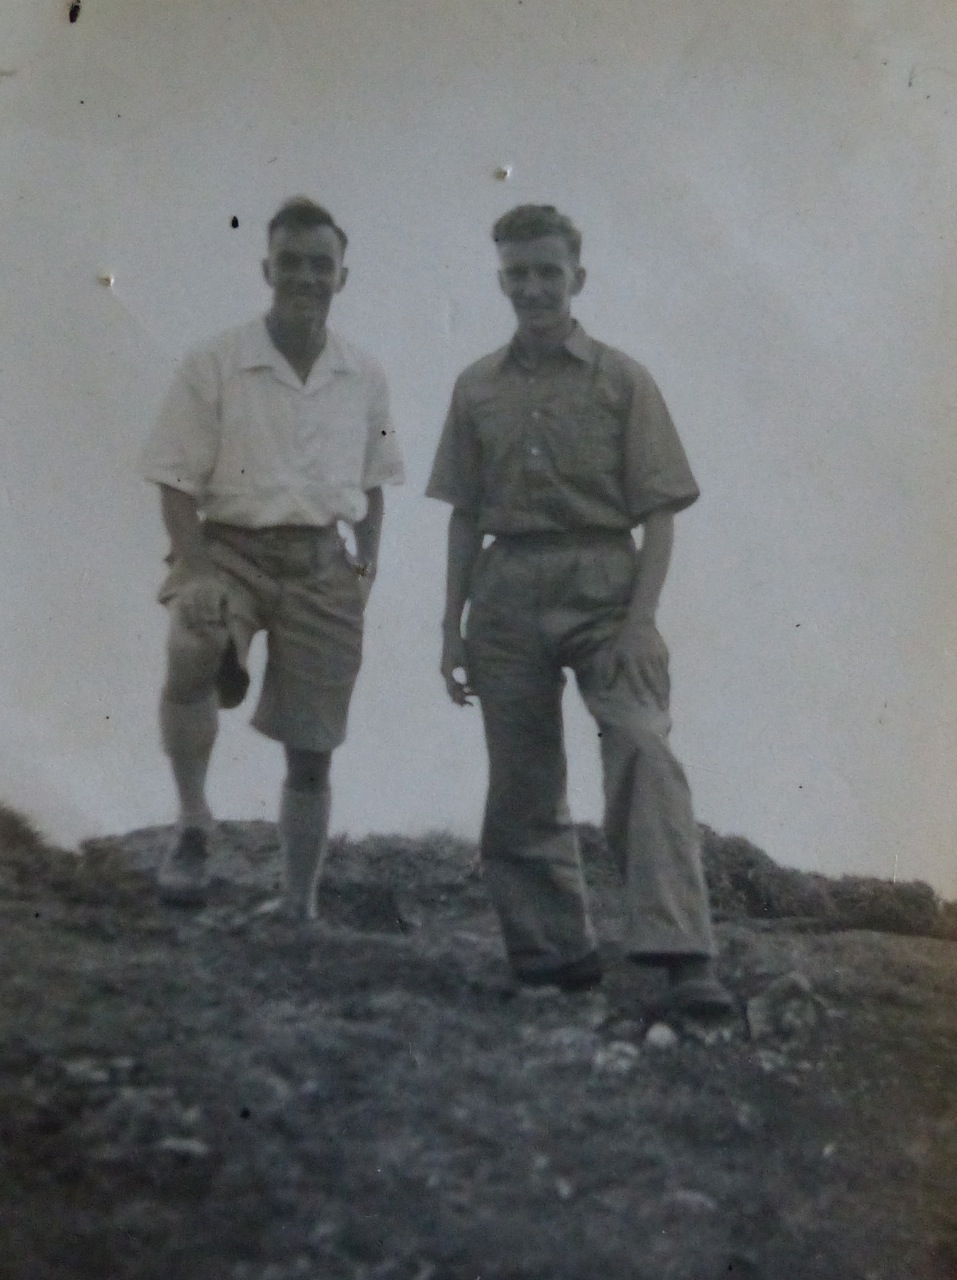 I Mortimer & Cyril Roote India 1944